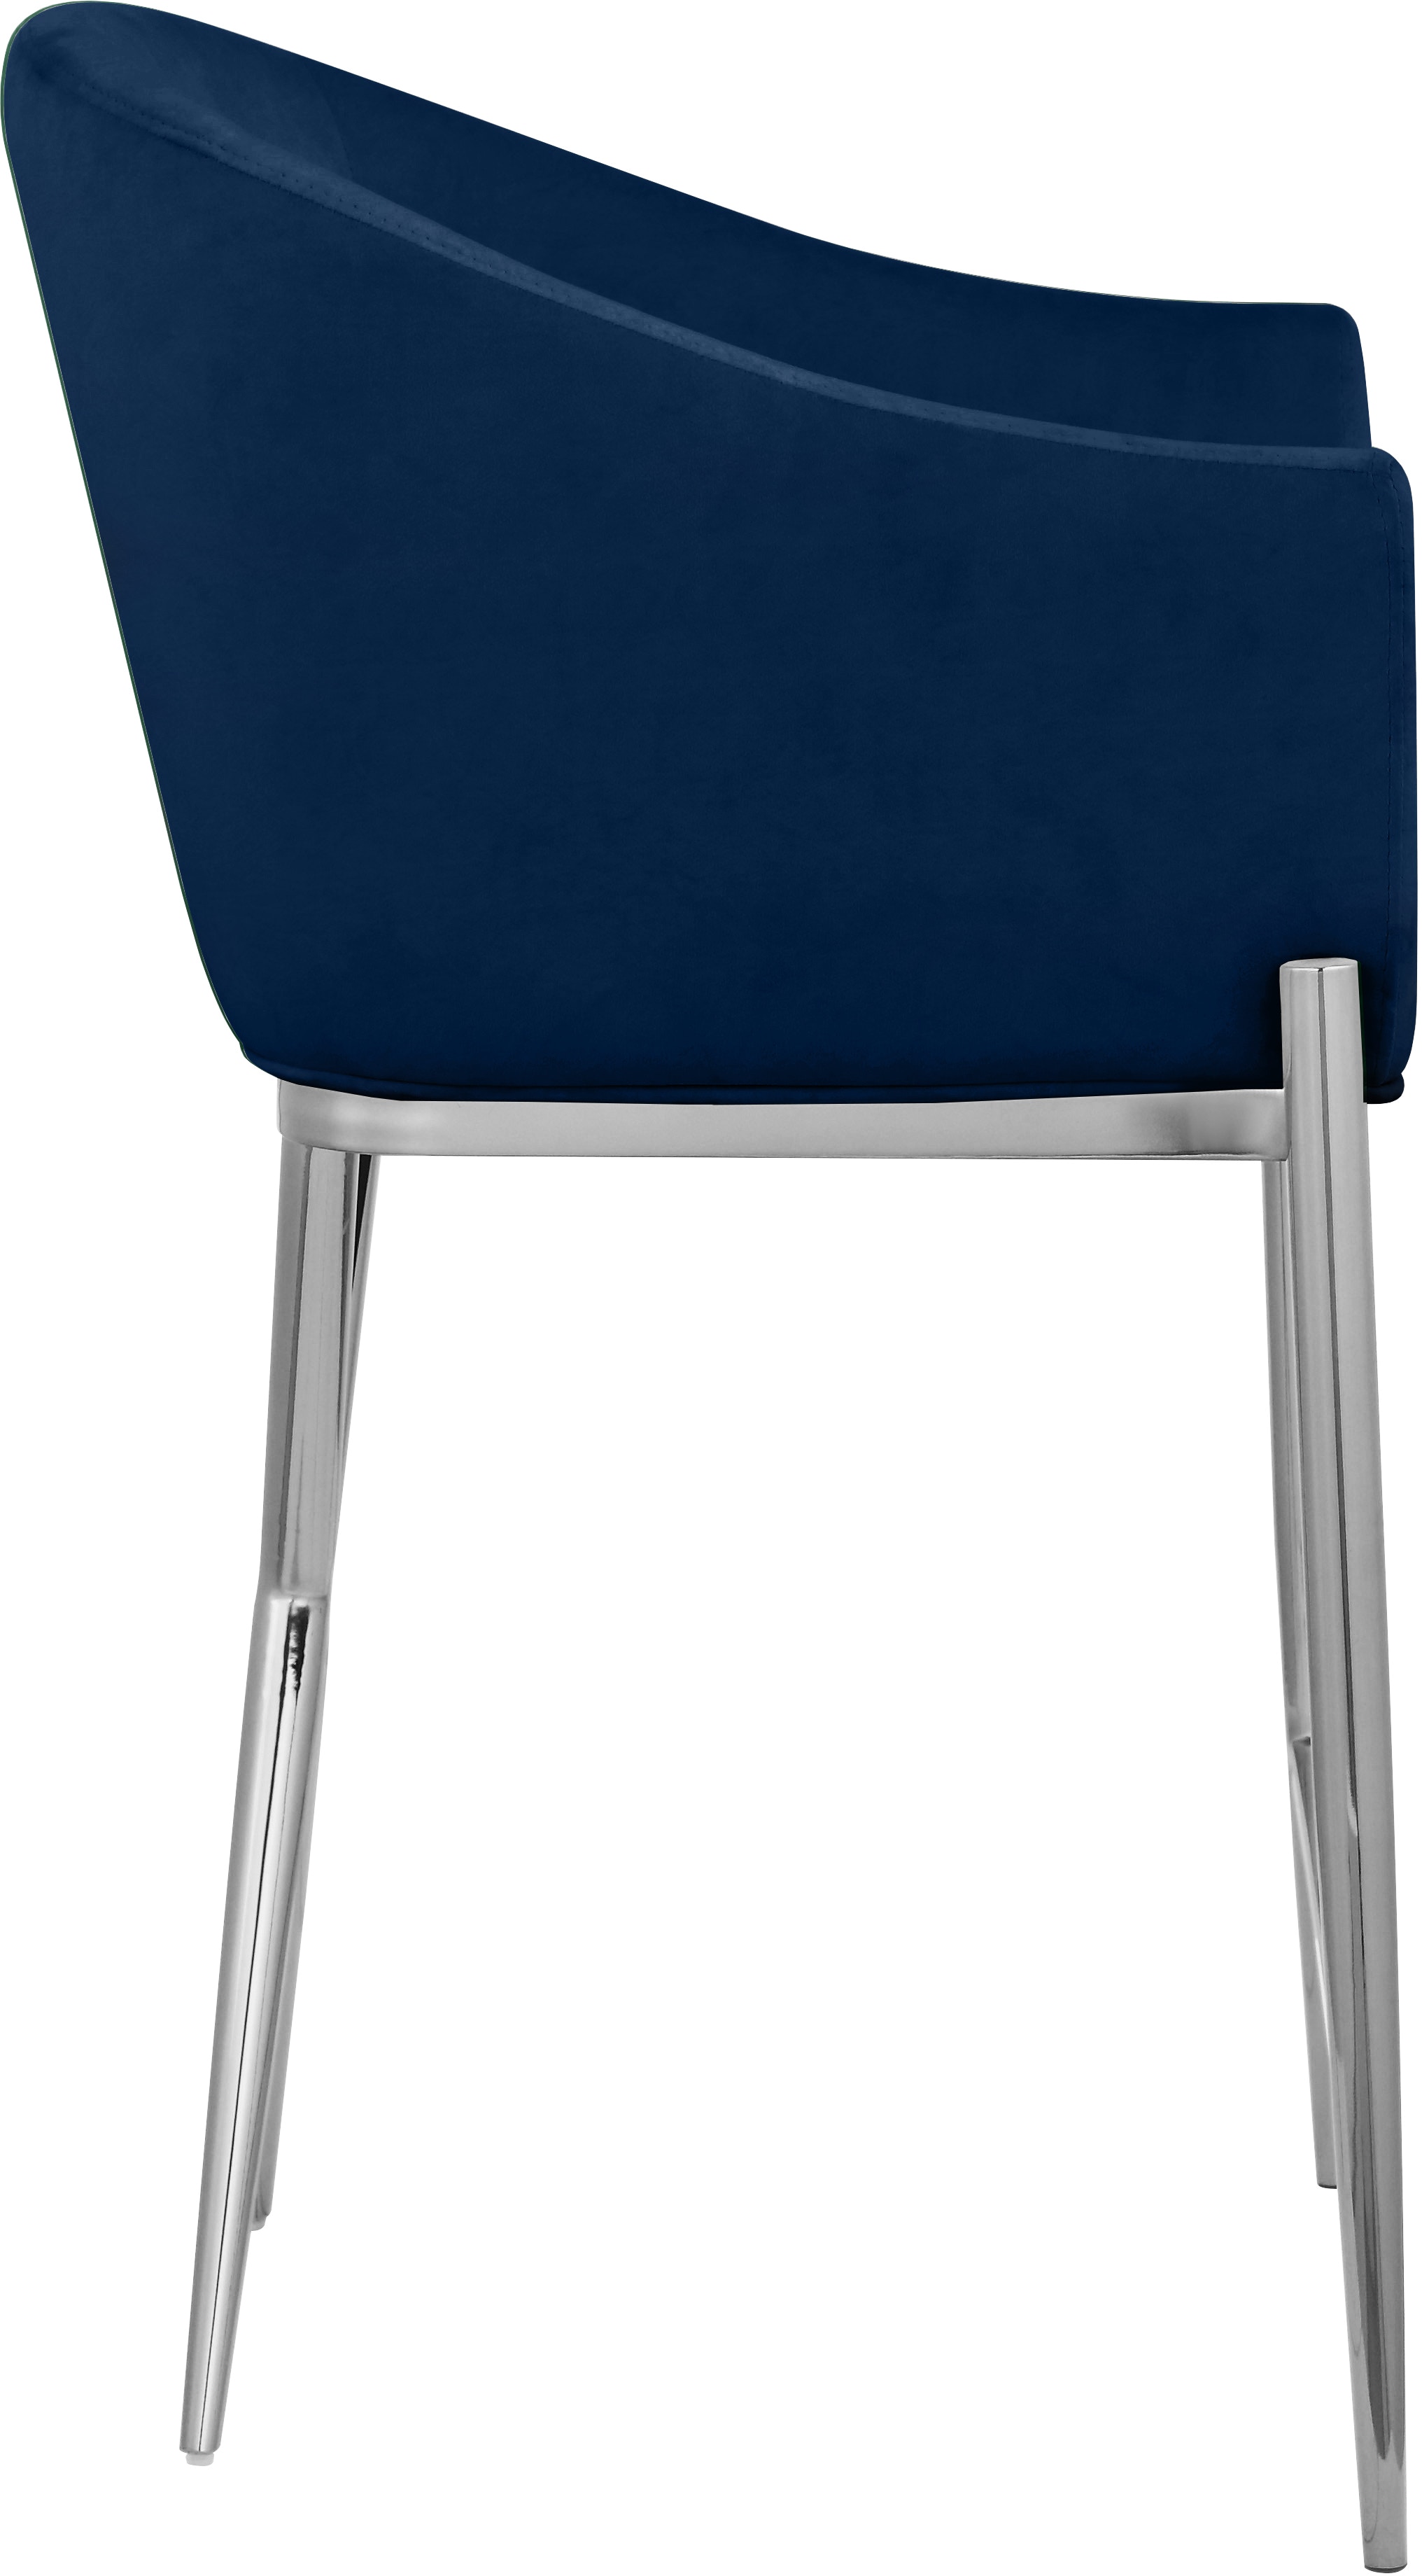 Navy Meridian Furniture 866Navy-C Xavier Collection Velvet Upholstered Counter Stool with Sturdy Chrome Metal Legs 23.5 W x 22.5 D x 38 H